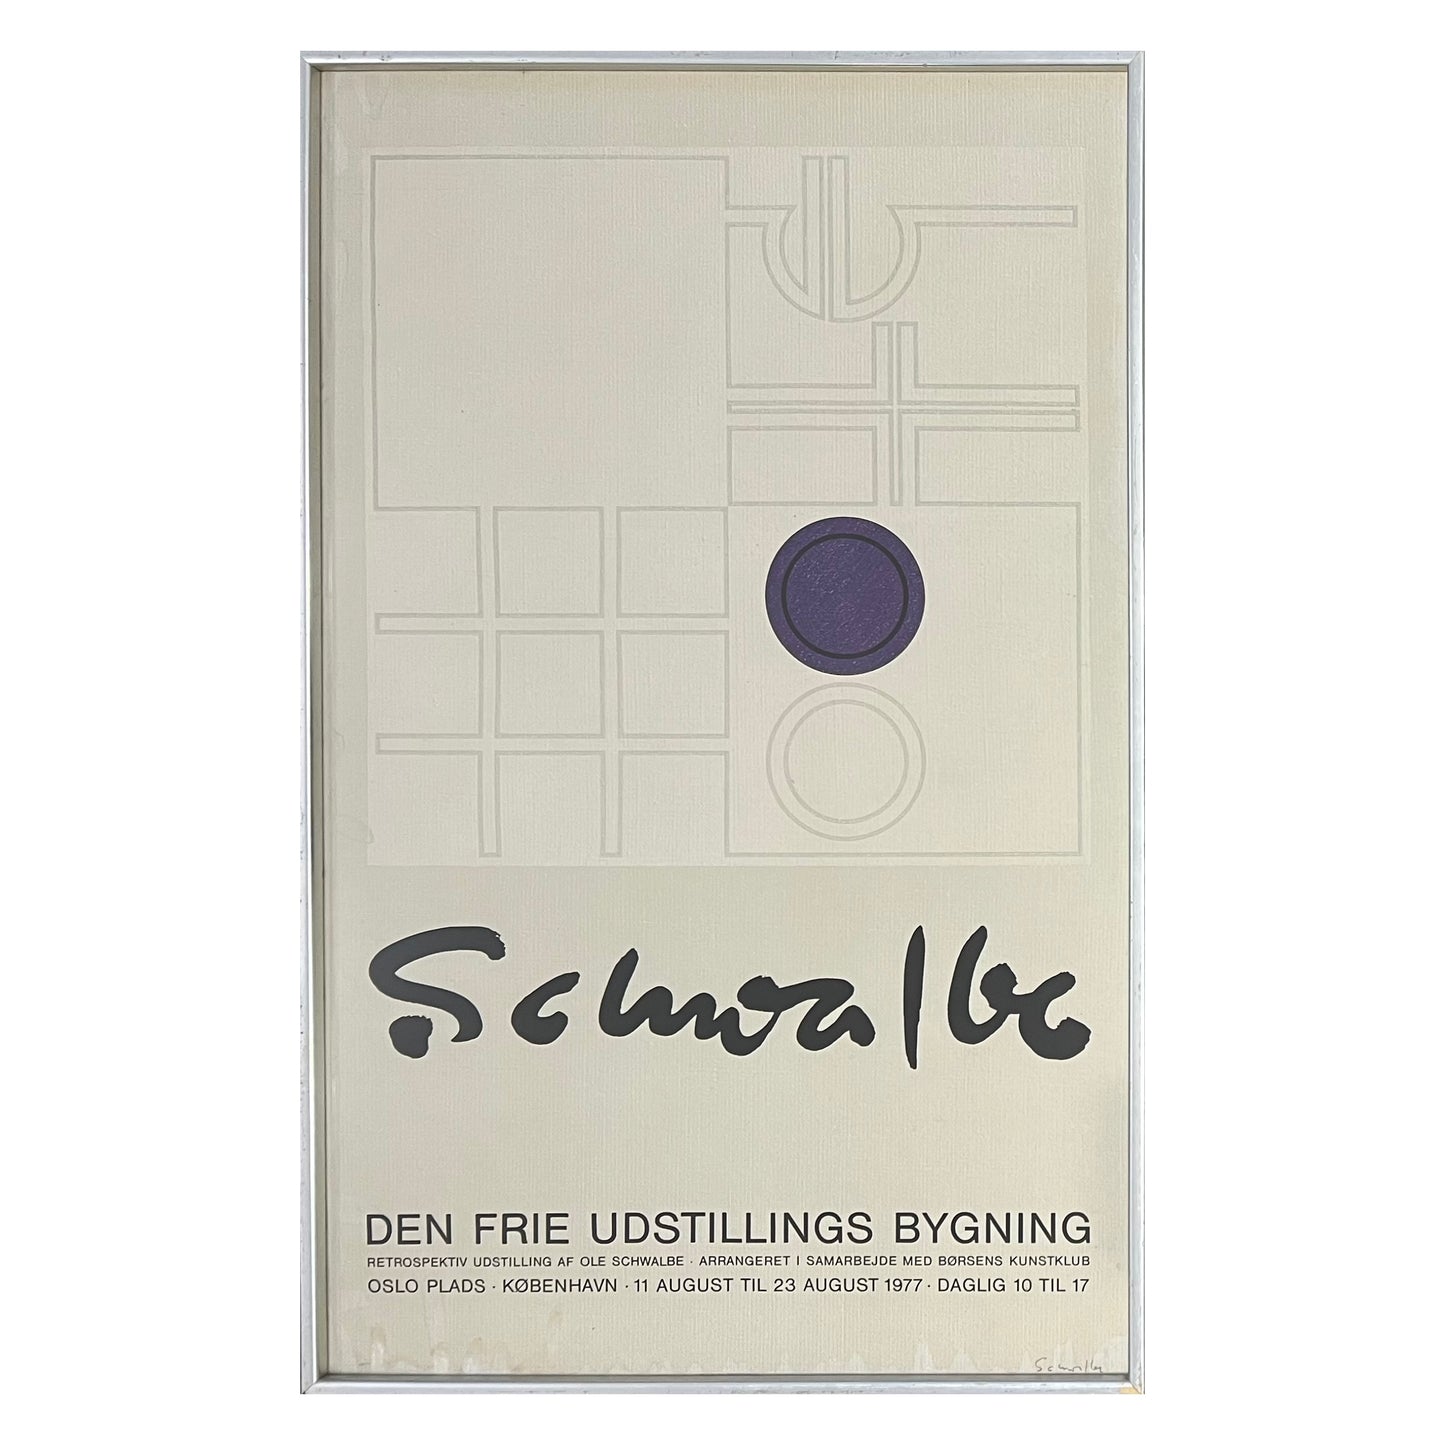 Ole Schwalbe. Exhibition posters, 1977